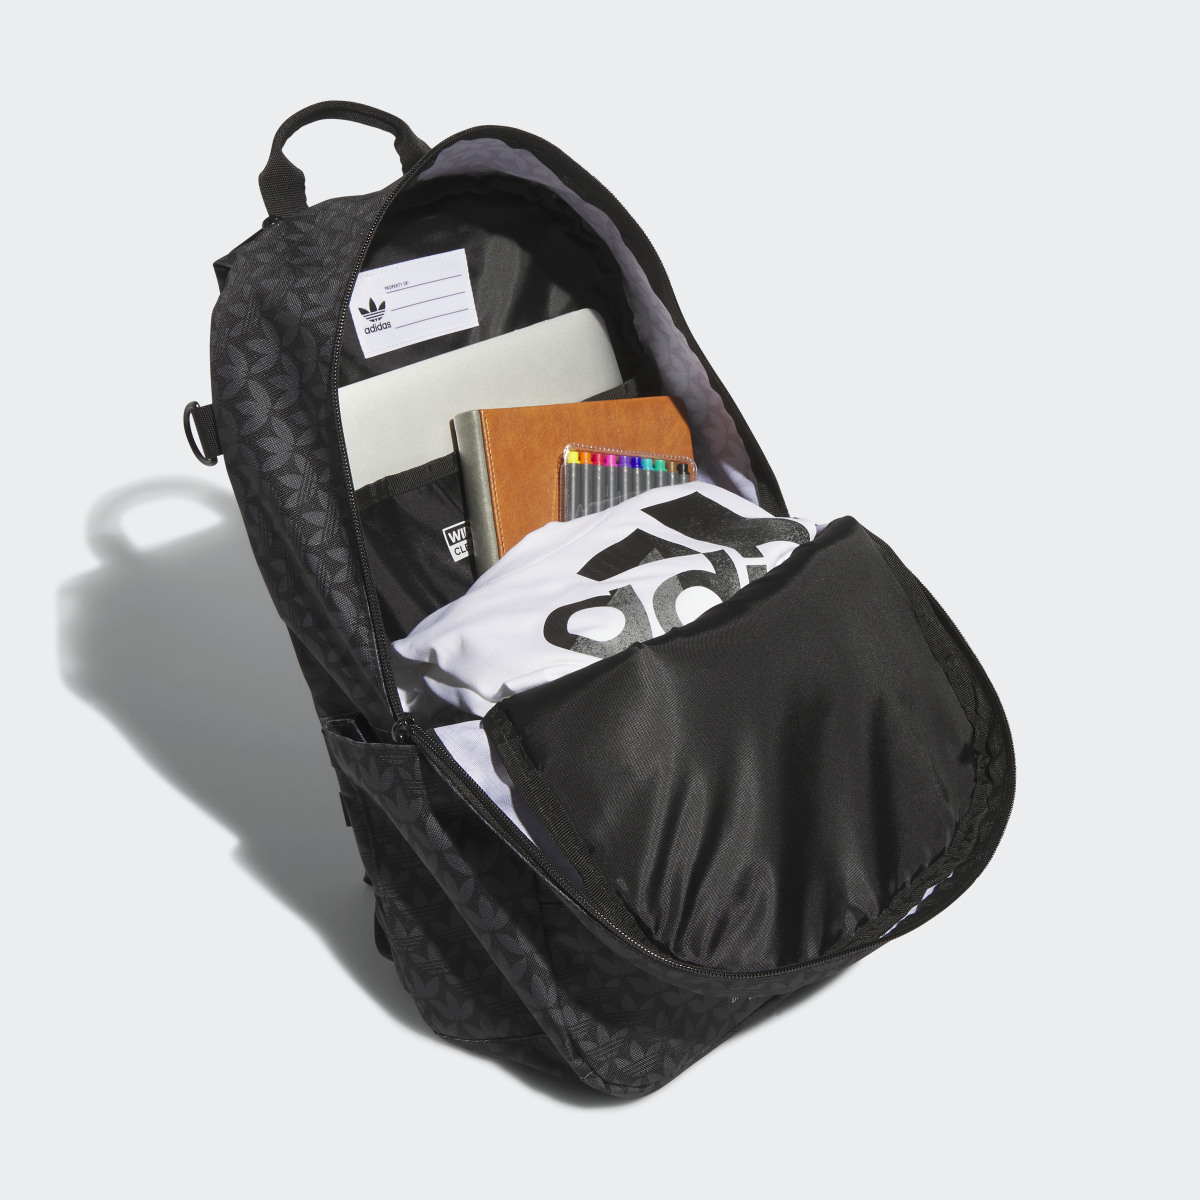 Adidas Graphic Backpack. 5